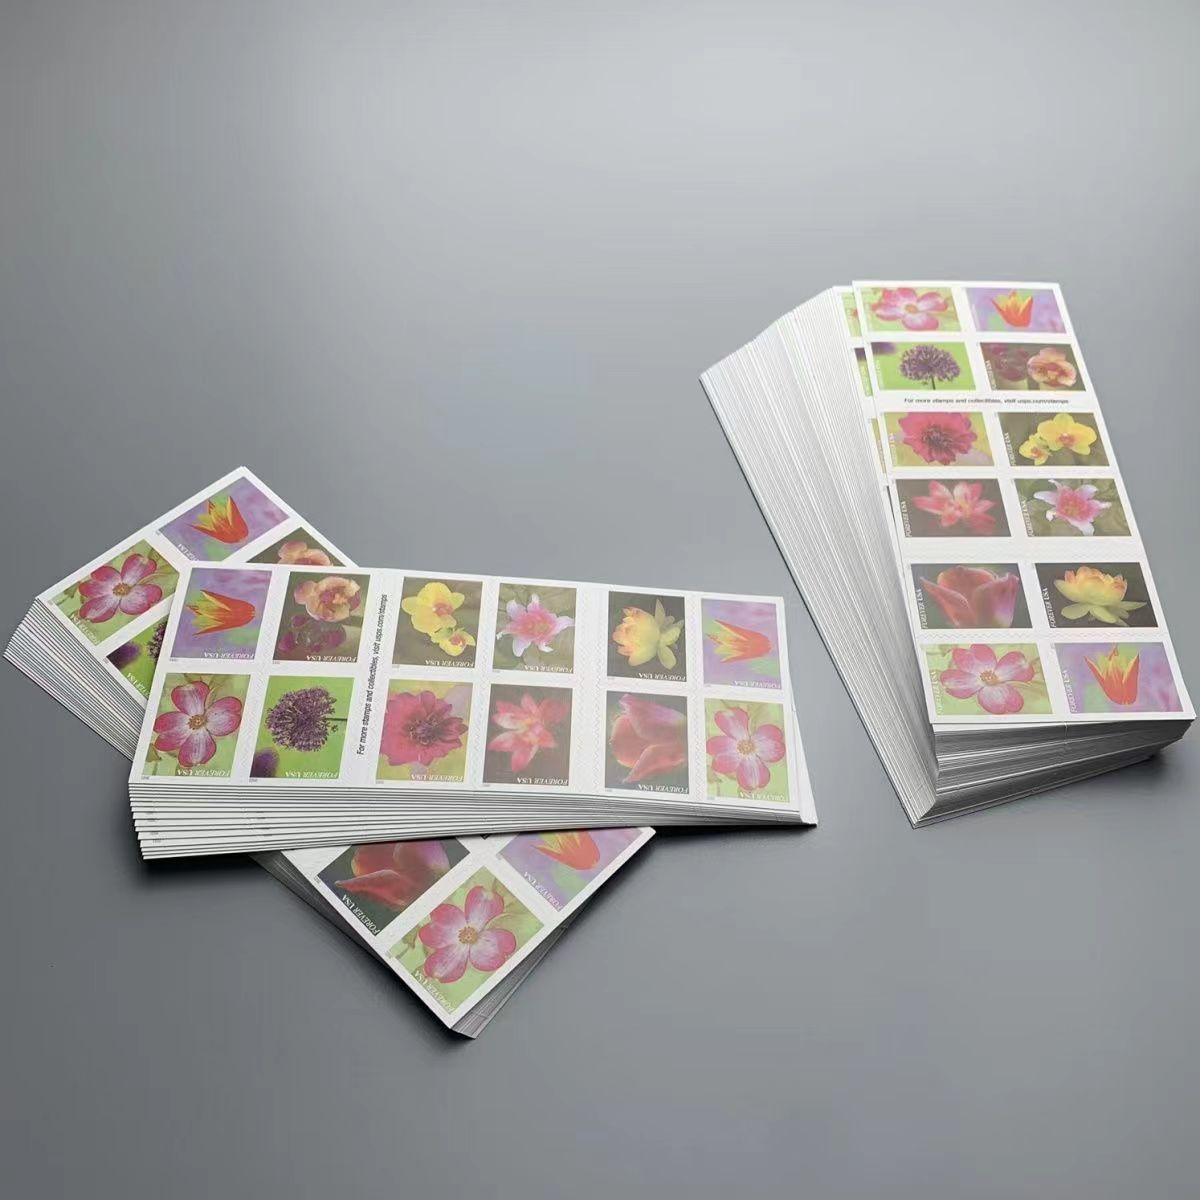 A booklet of "Garden Beauty 2021" USPS First-Class Forever stamps, issued in 2021, featuring various colorful flowers.